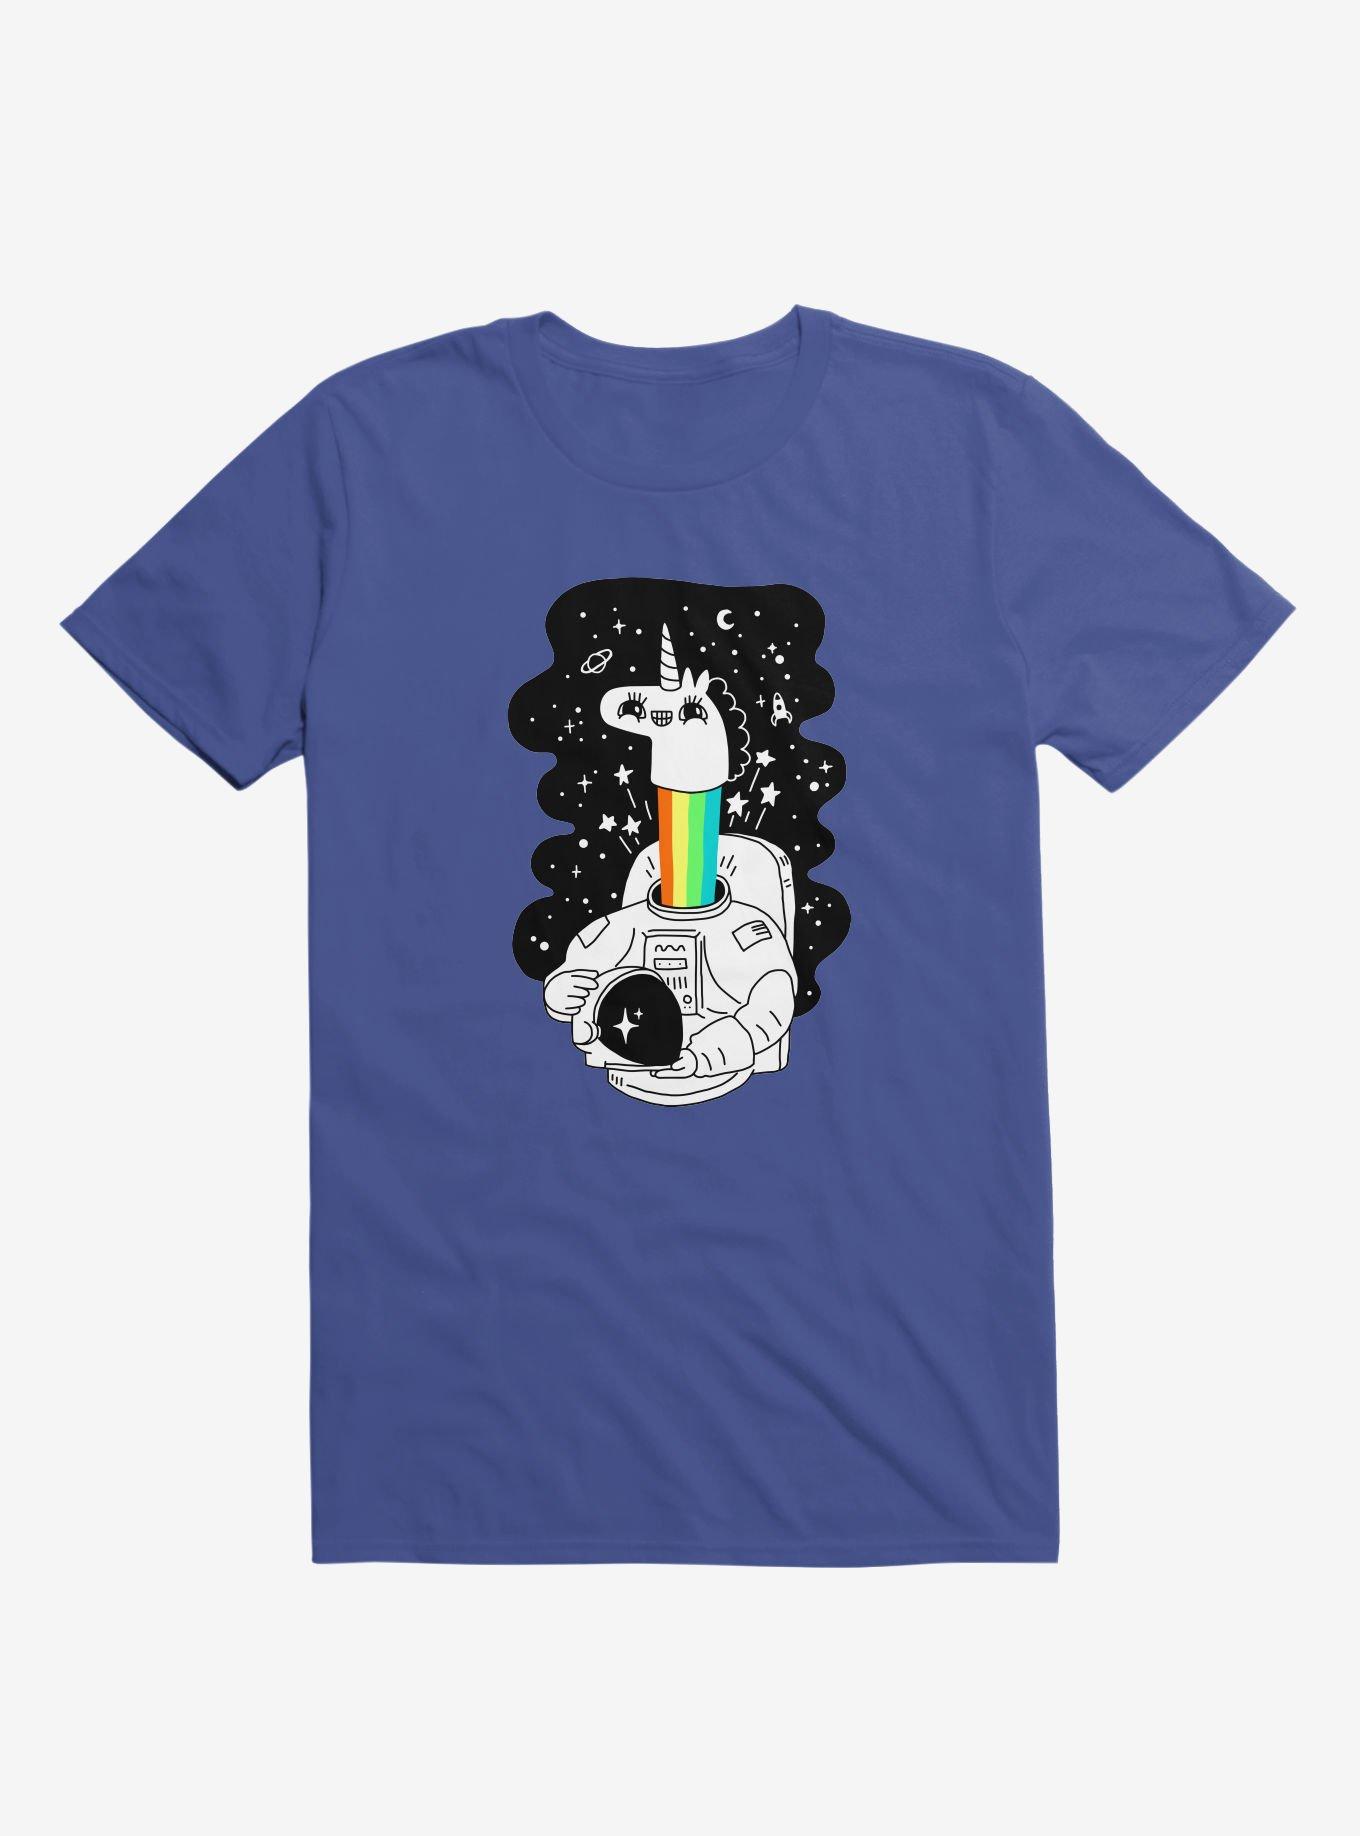 See You Space! Unicorn Astronaut Royal Blue T-Shirt